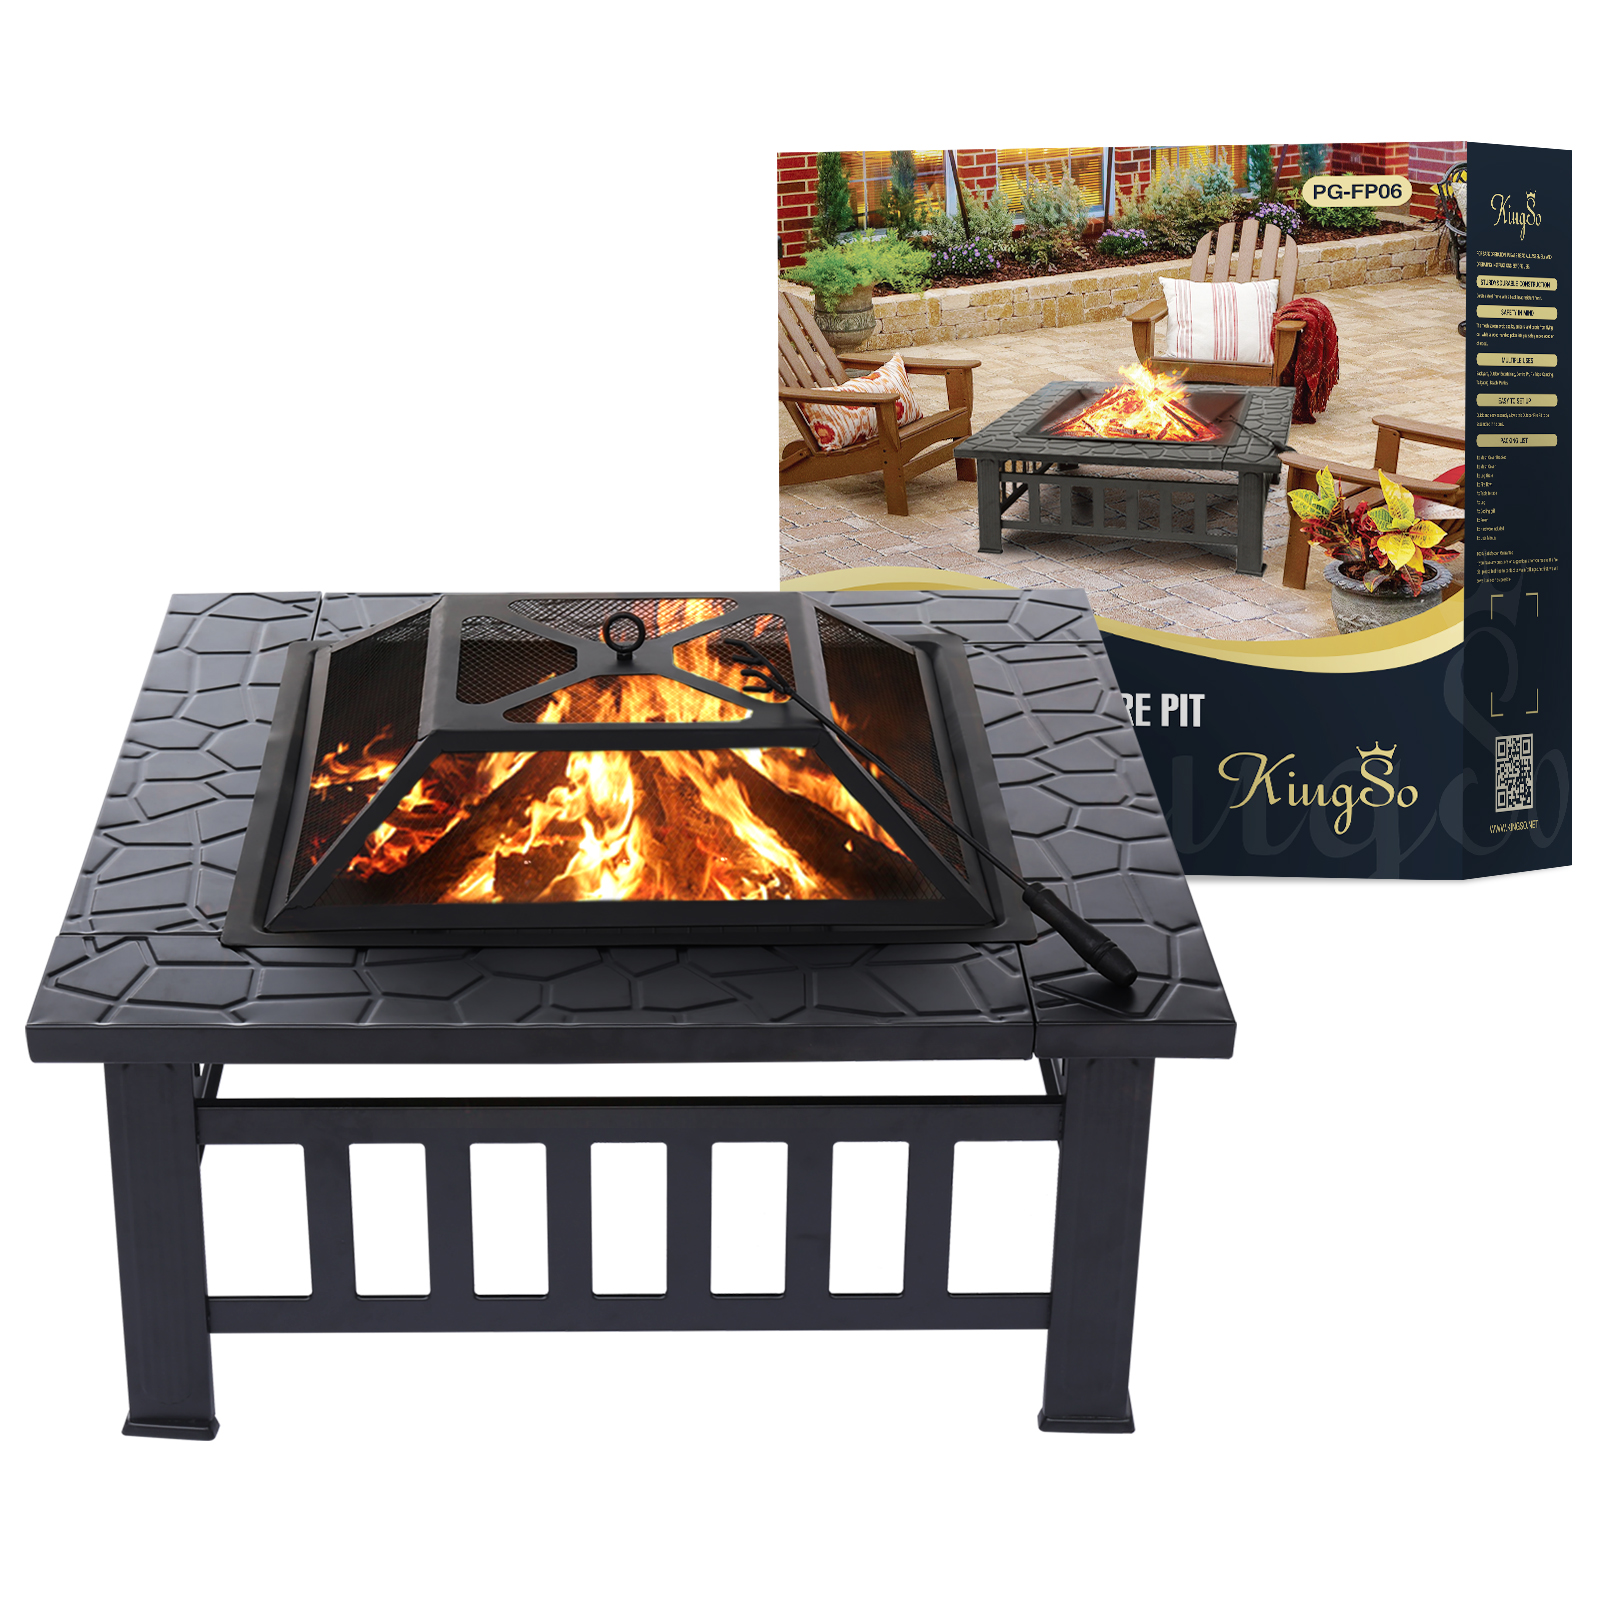 Kingso-32-Inch-Fire-Pit-Square-Steel-Wood-Burning-Large-Firepits-with-Waterproof-Cover-Spark-ScreenL-1787362-13